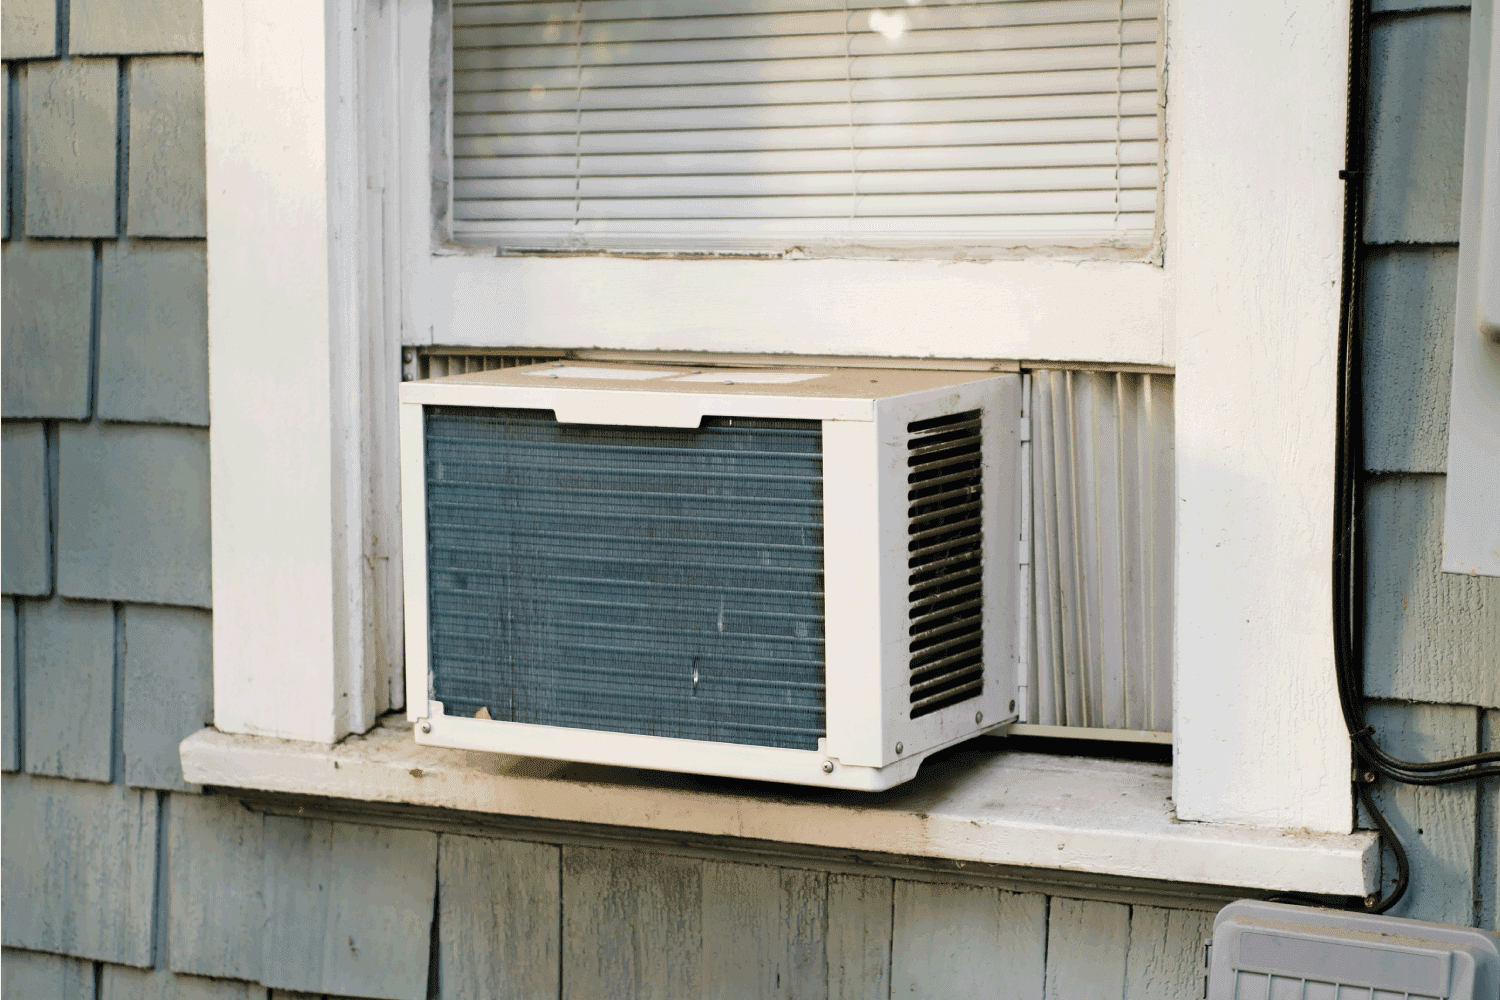 An air conditioning unit sticking out a window.